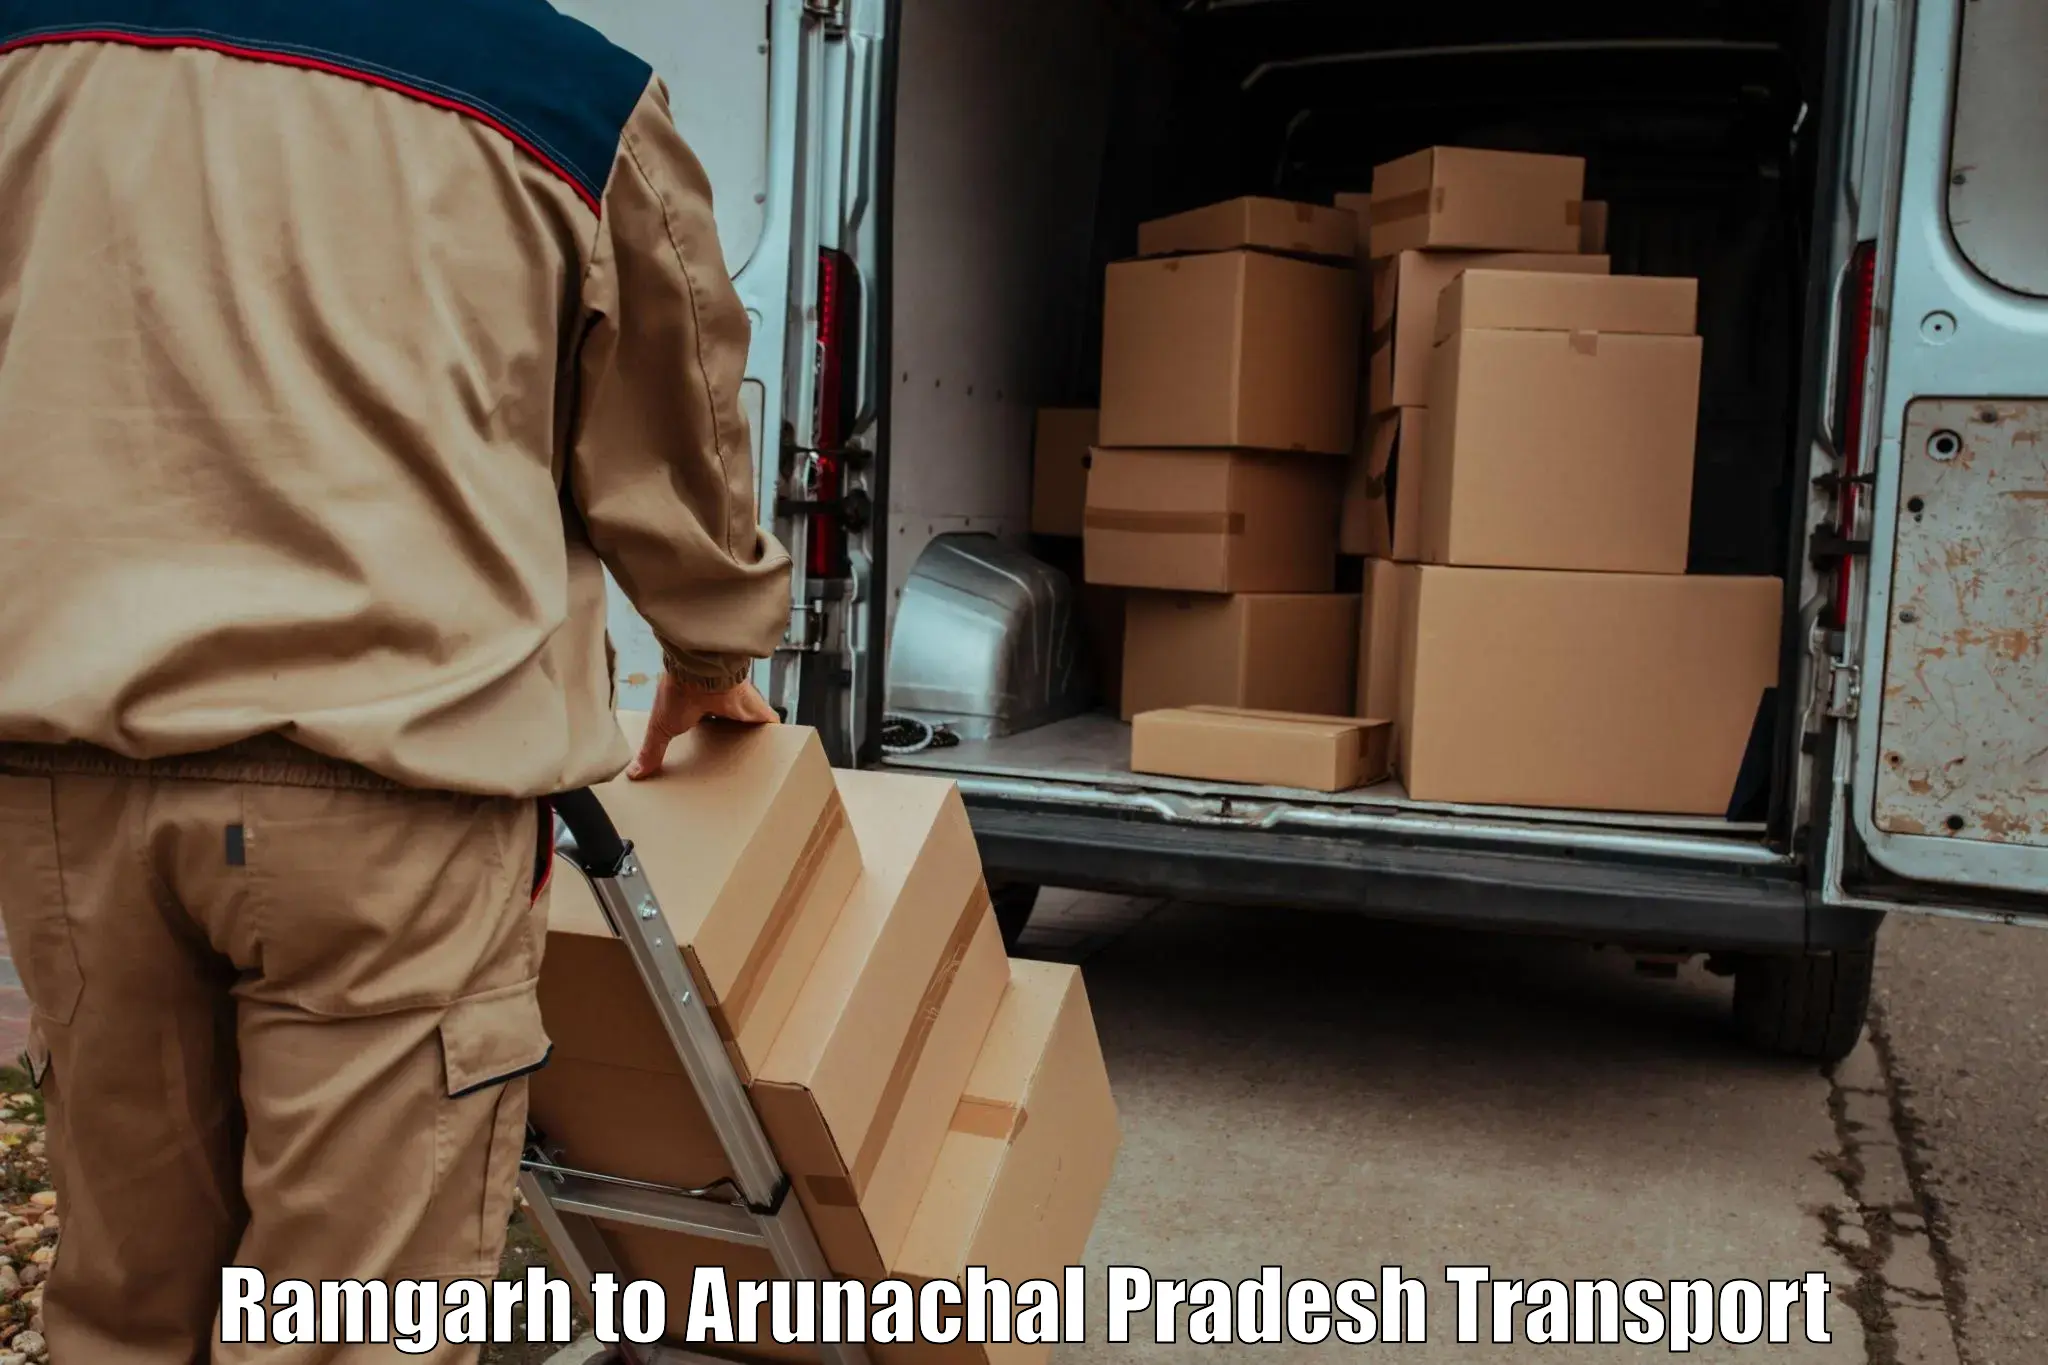 Daily parcel service transport Ramgarh to Papum Pare